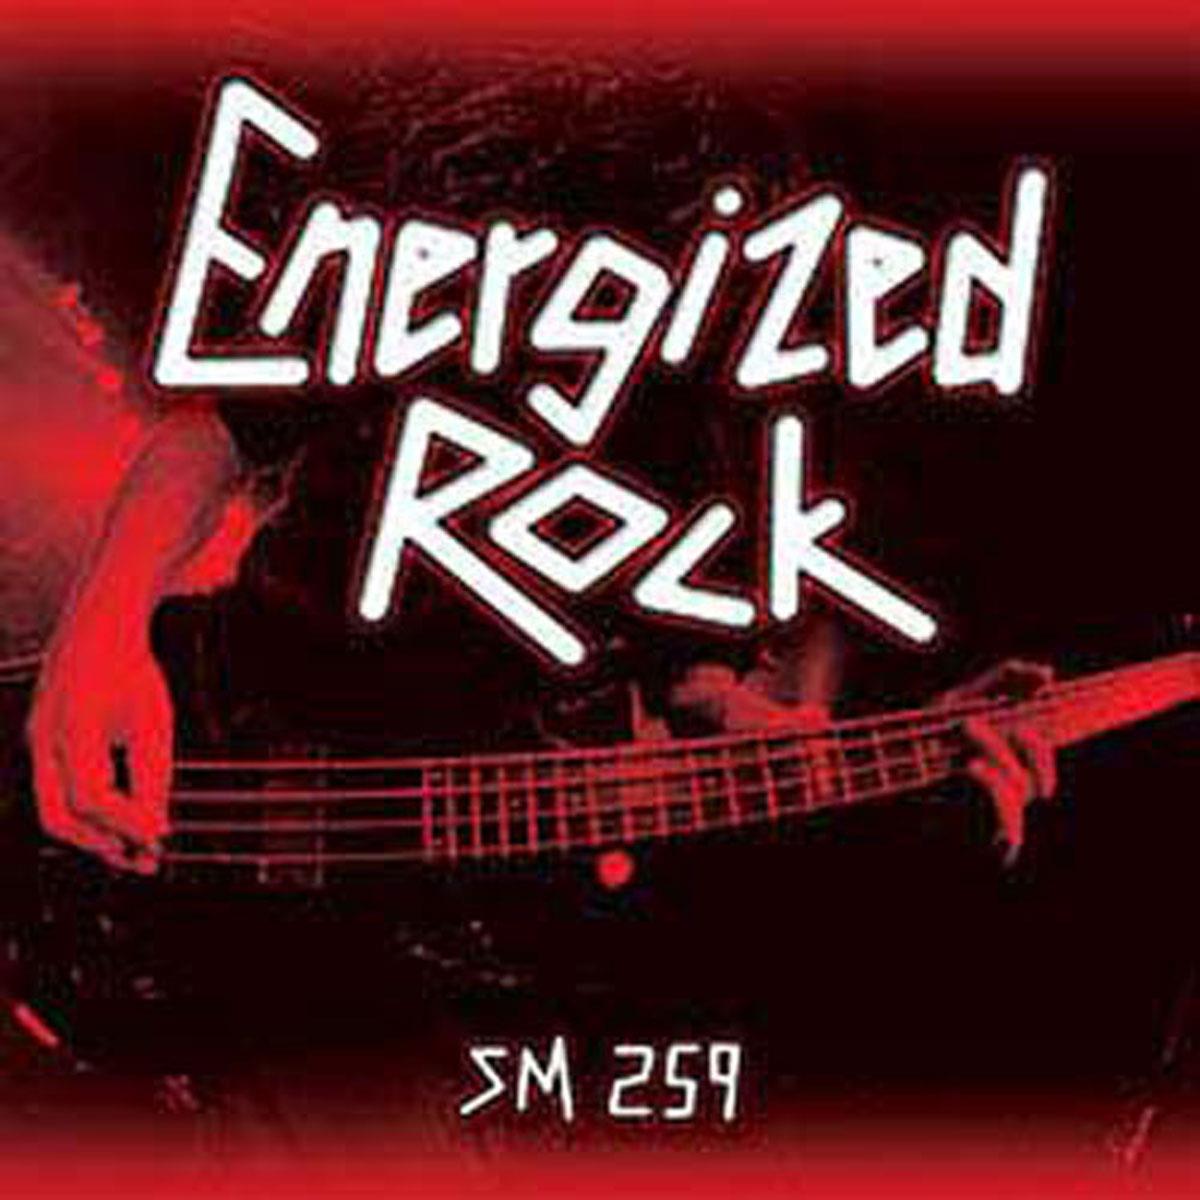 Image of Sound Ideas Royalty Free Music Energized Rock Software